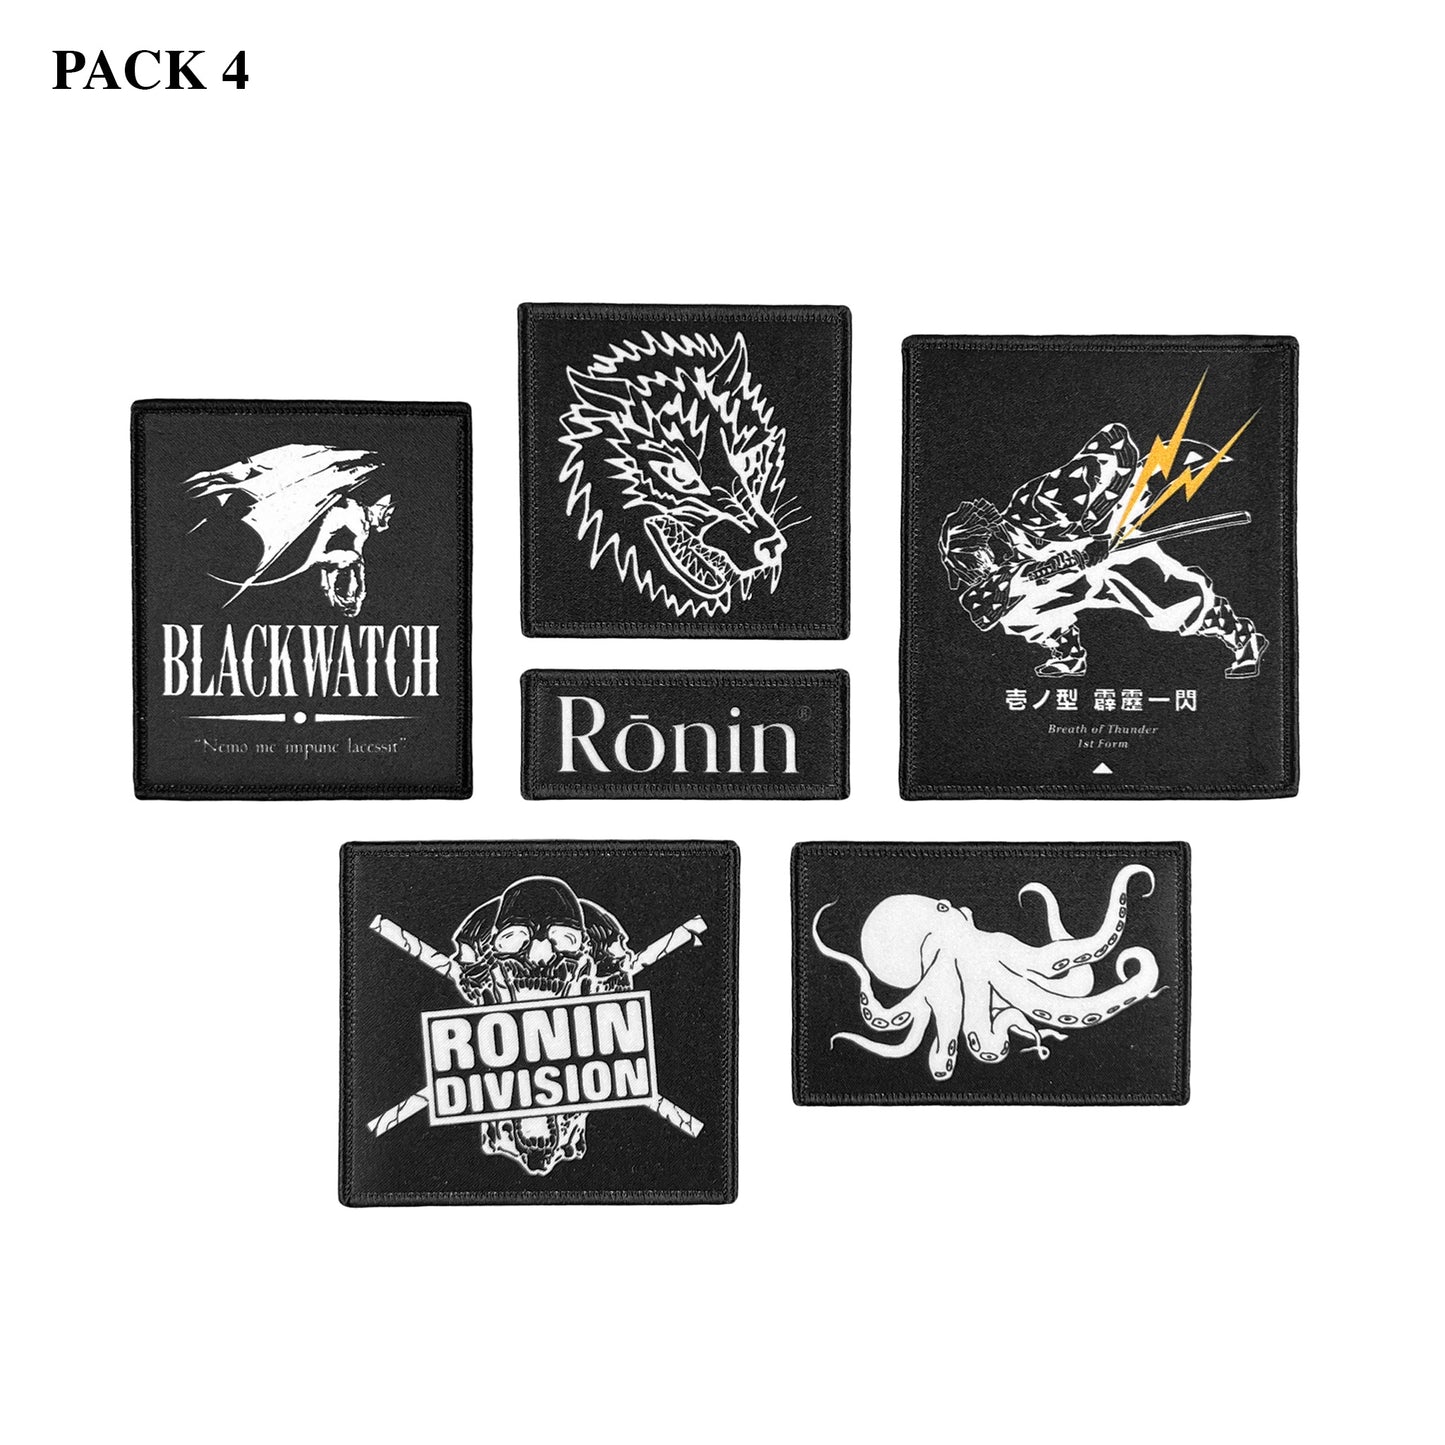 10 Year Iron-on Patches - Black